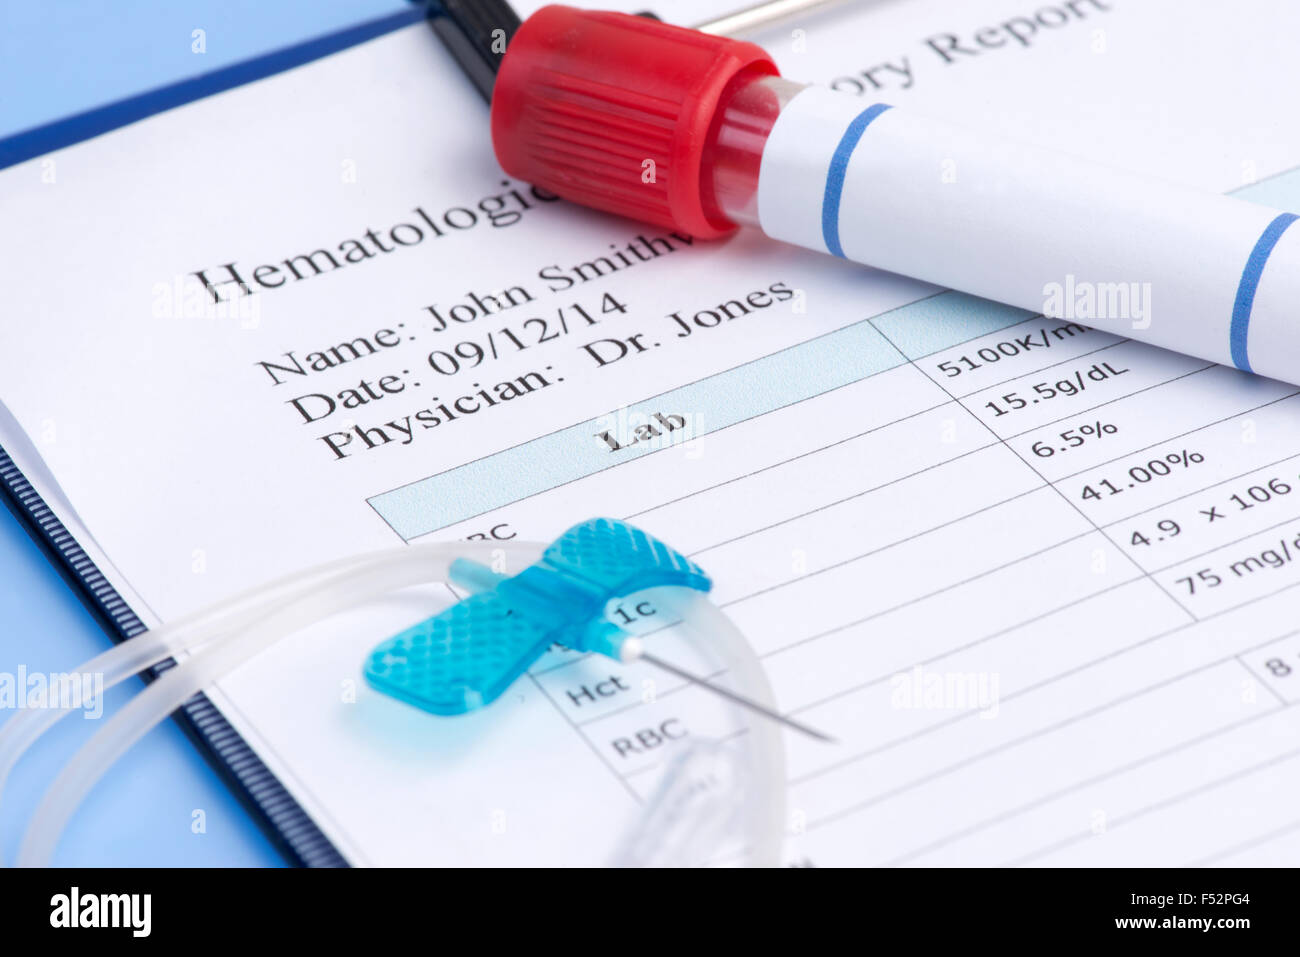 Hematology report with IV needle and blood collection tube. Stock Photo